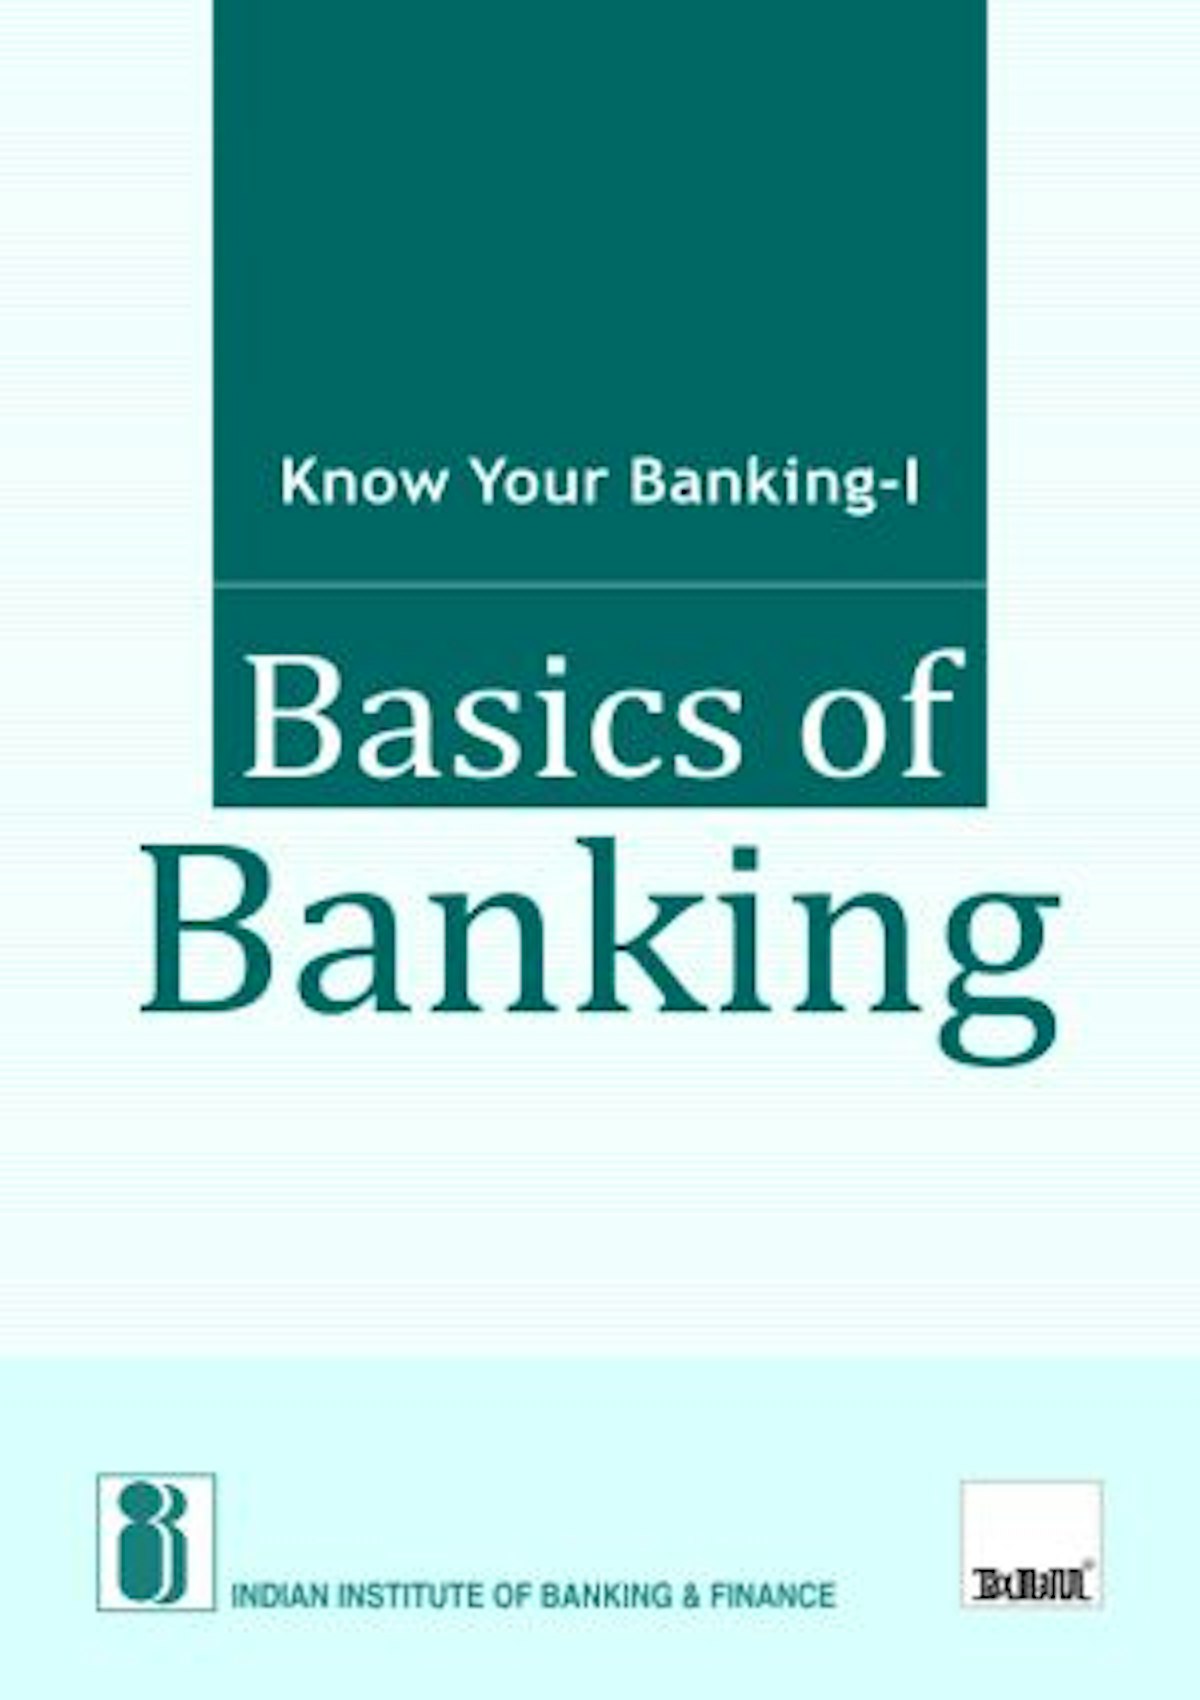 Banking book is. Banking book. Banking Finance books. The principles of Banking. Basics i.